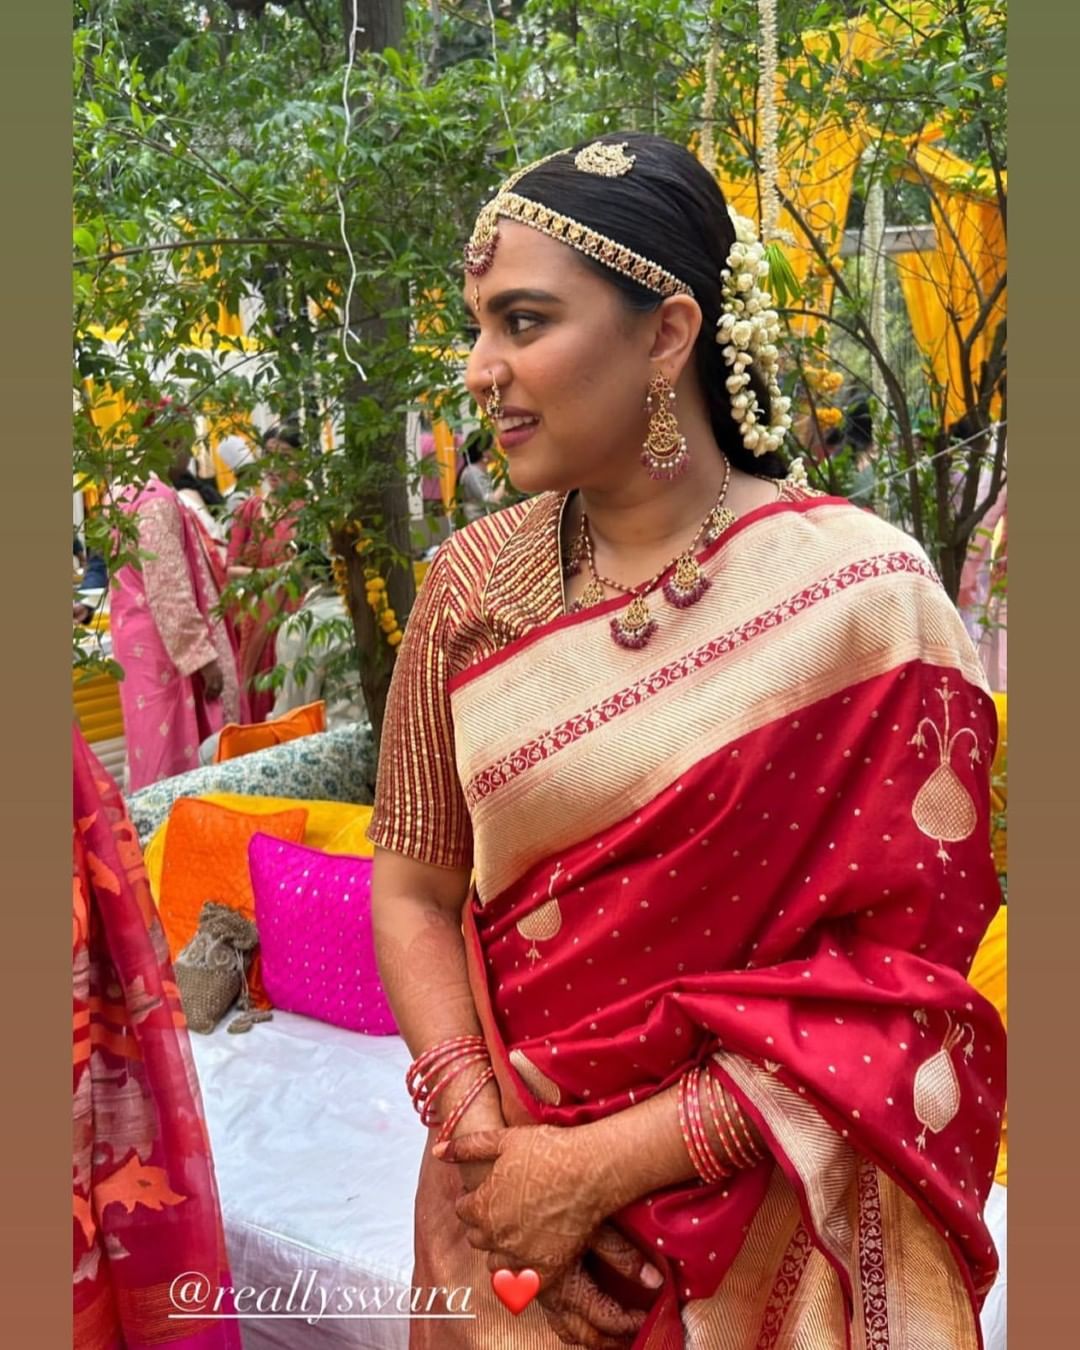 Swara Bhasker was spotted dressed like a South Indian bride in her wedding